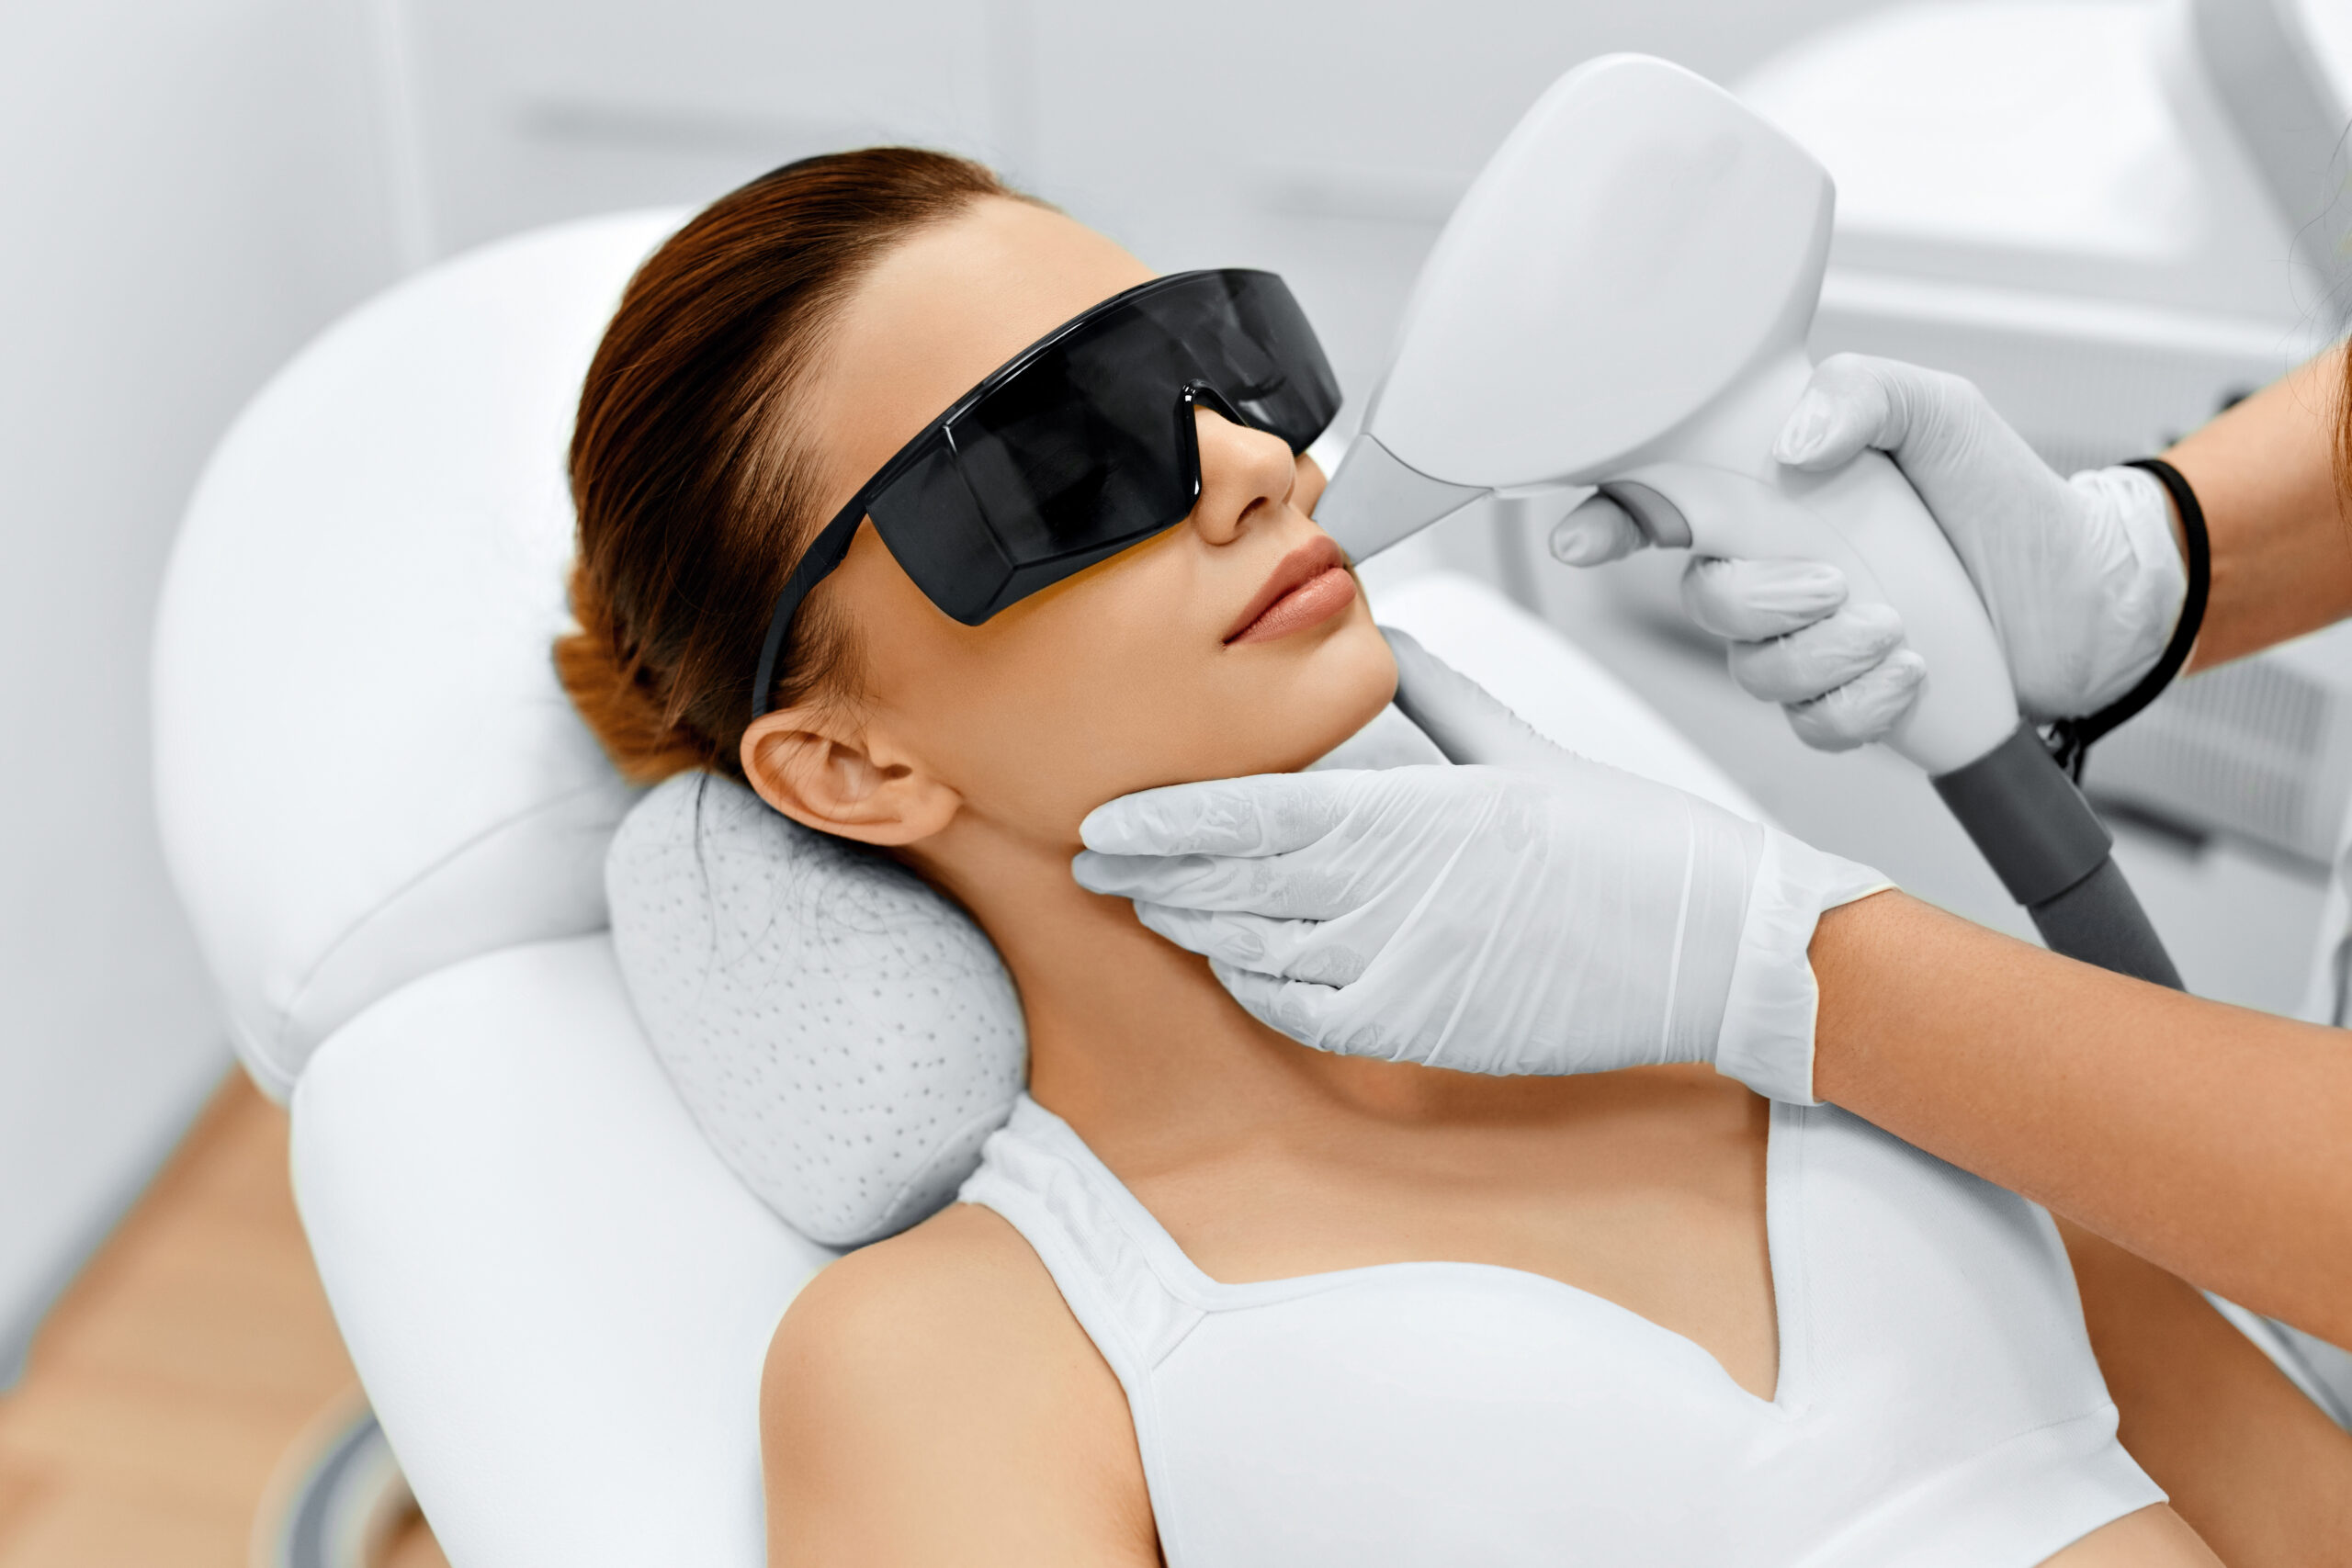 A Woman getting Laser Treatment on Skin through a Device | Purely Natural Medical Spa in Brooklyn, NY